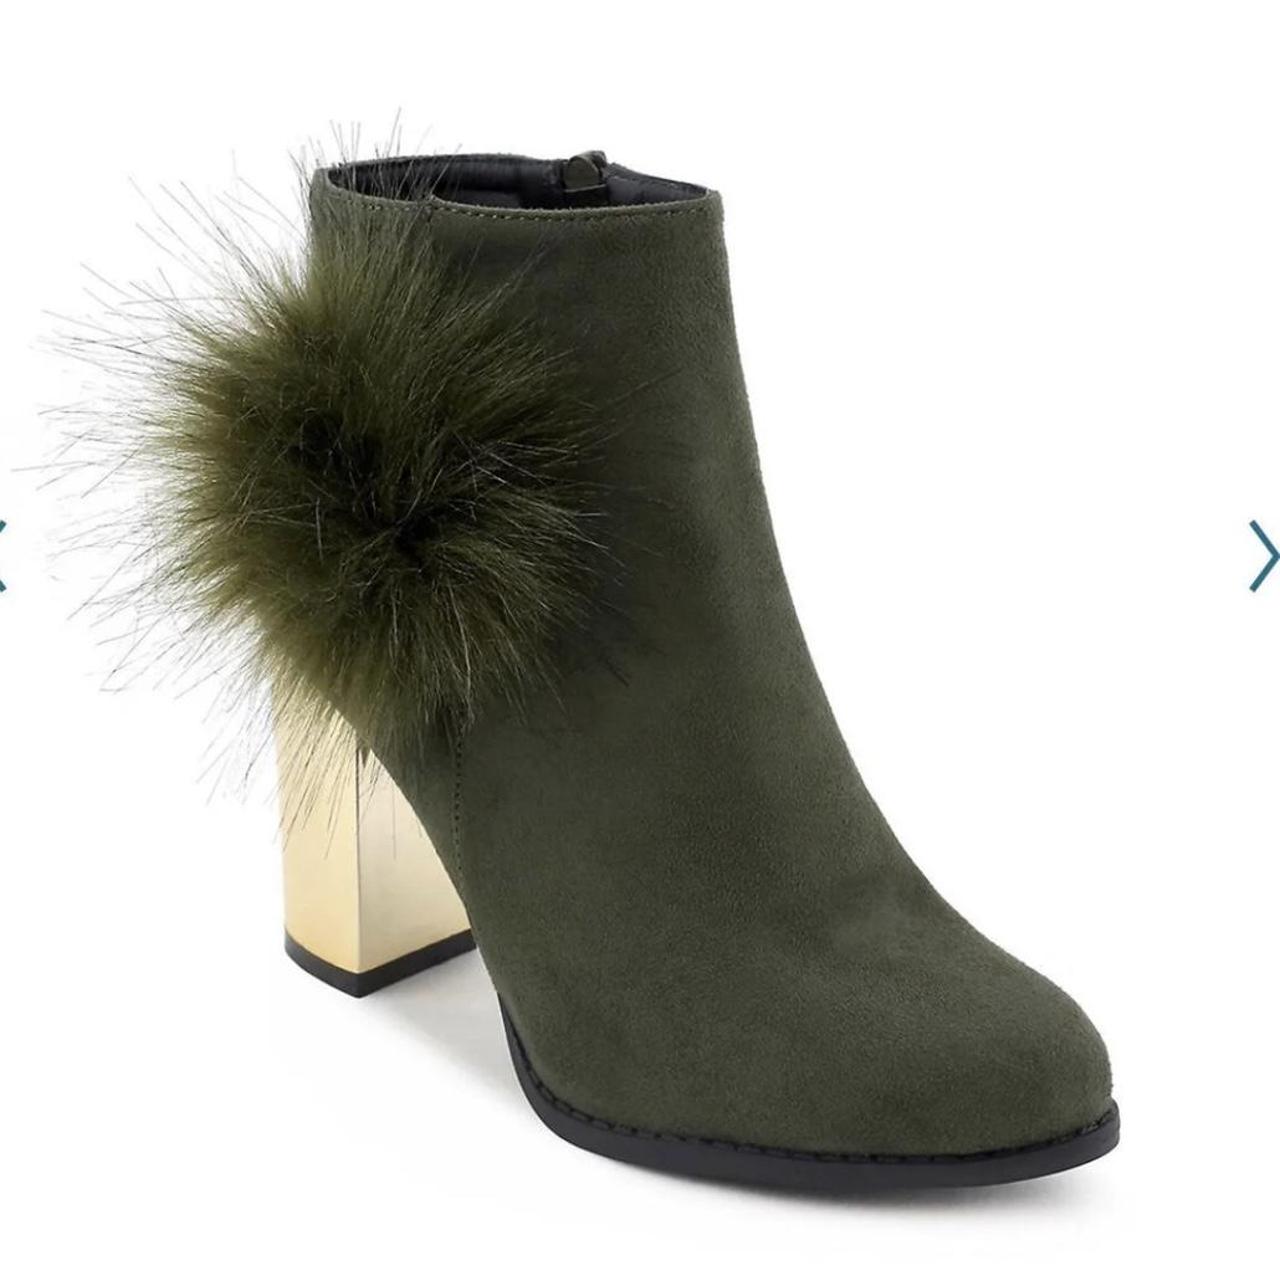 Product Image 3 - Olivia Miller Pom Ankle boot
BOOT